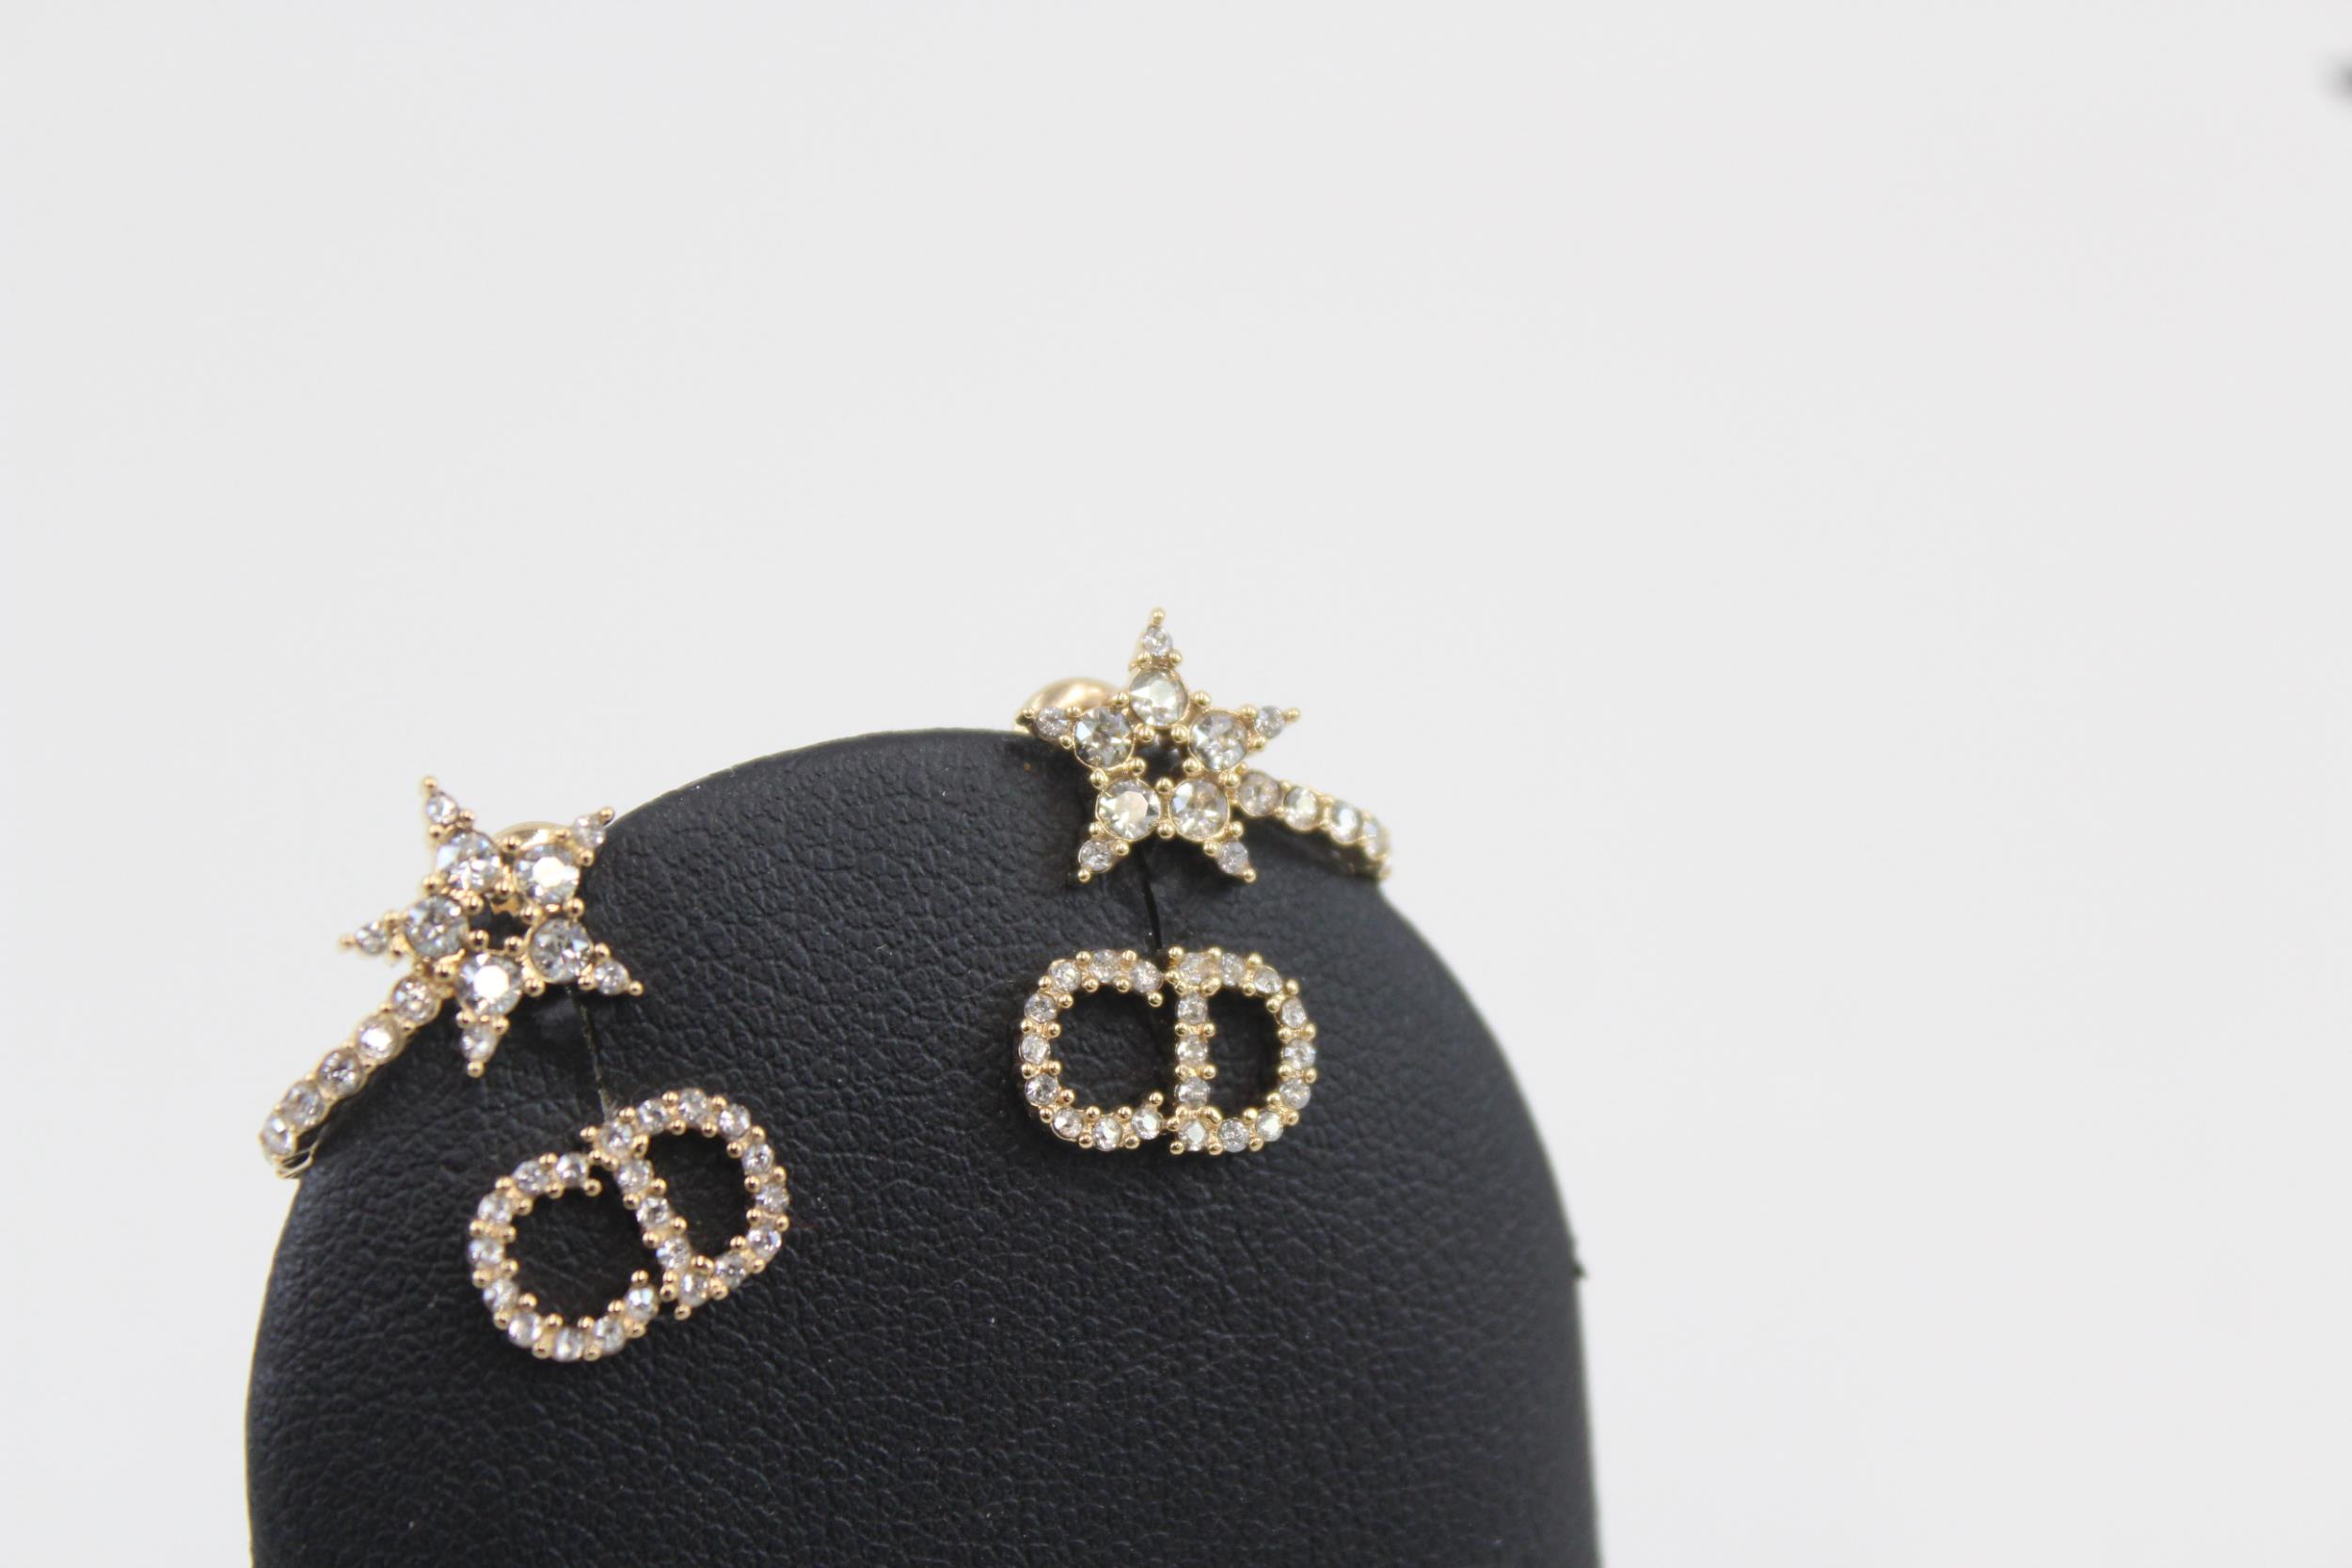 Pair of gold tone rhinestone earrings by designer Christian Dior with pouch (3g) - Image 5 of 7